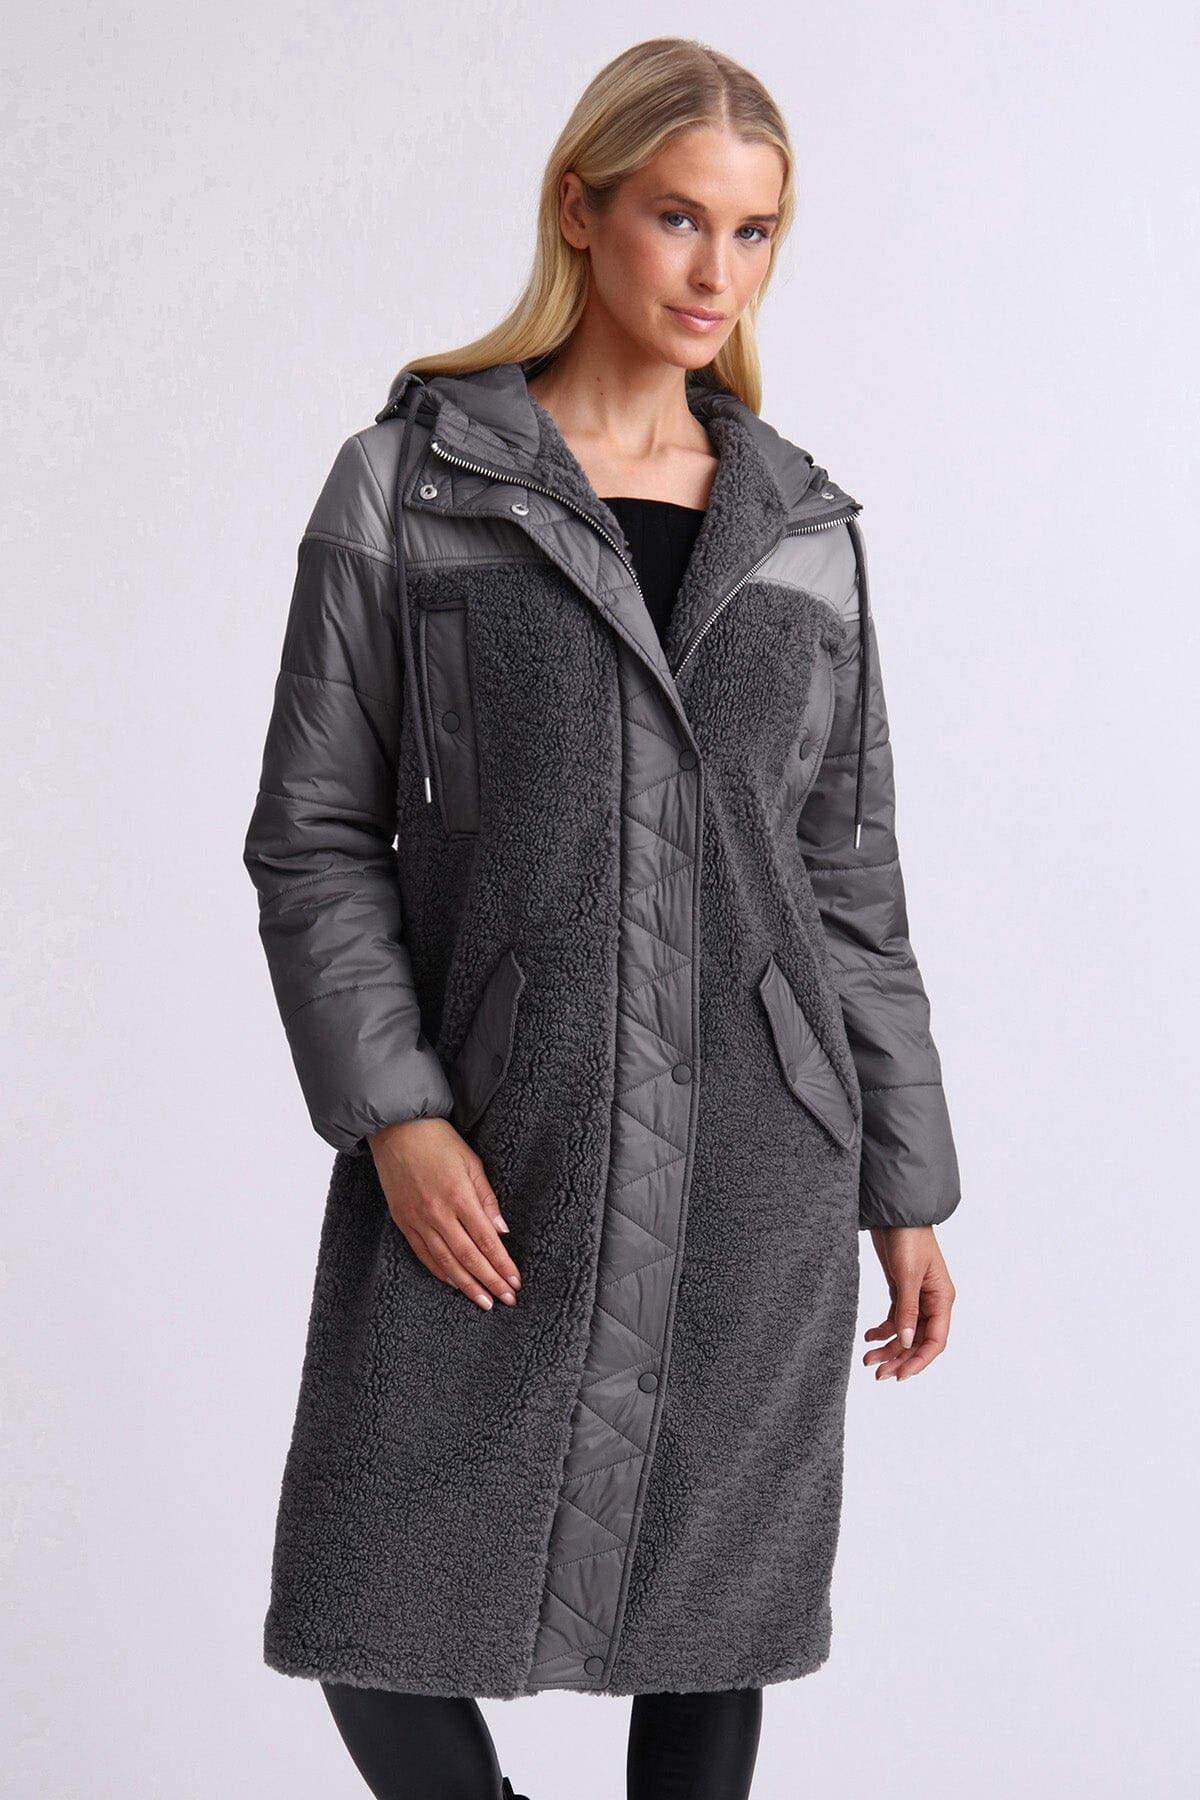 Charcoal grey mixed media faux shearling fur anorak long coat jacket - figure flattering day to night coats jackets for ladies by Avec Les Filles